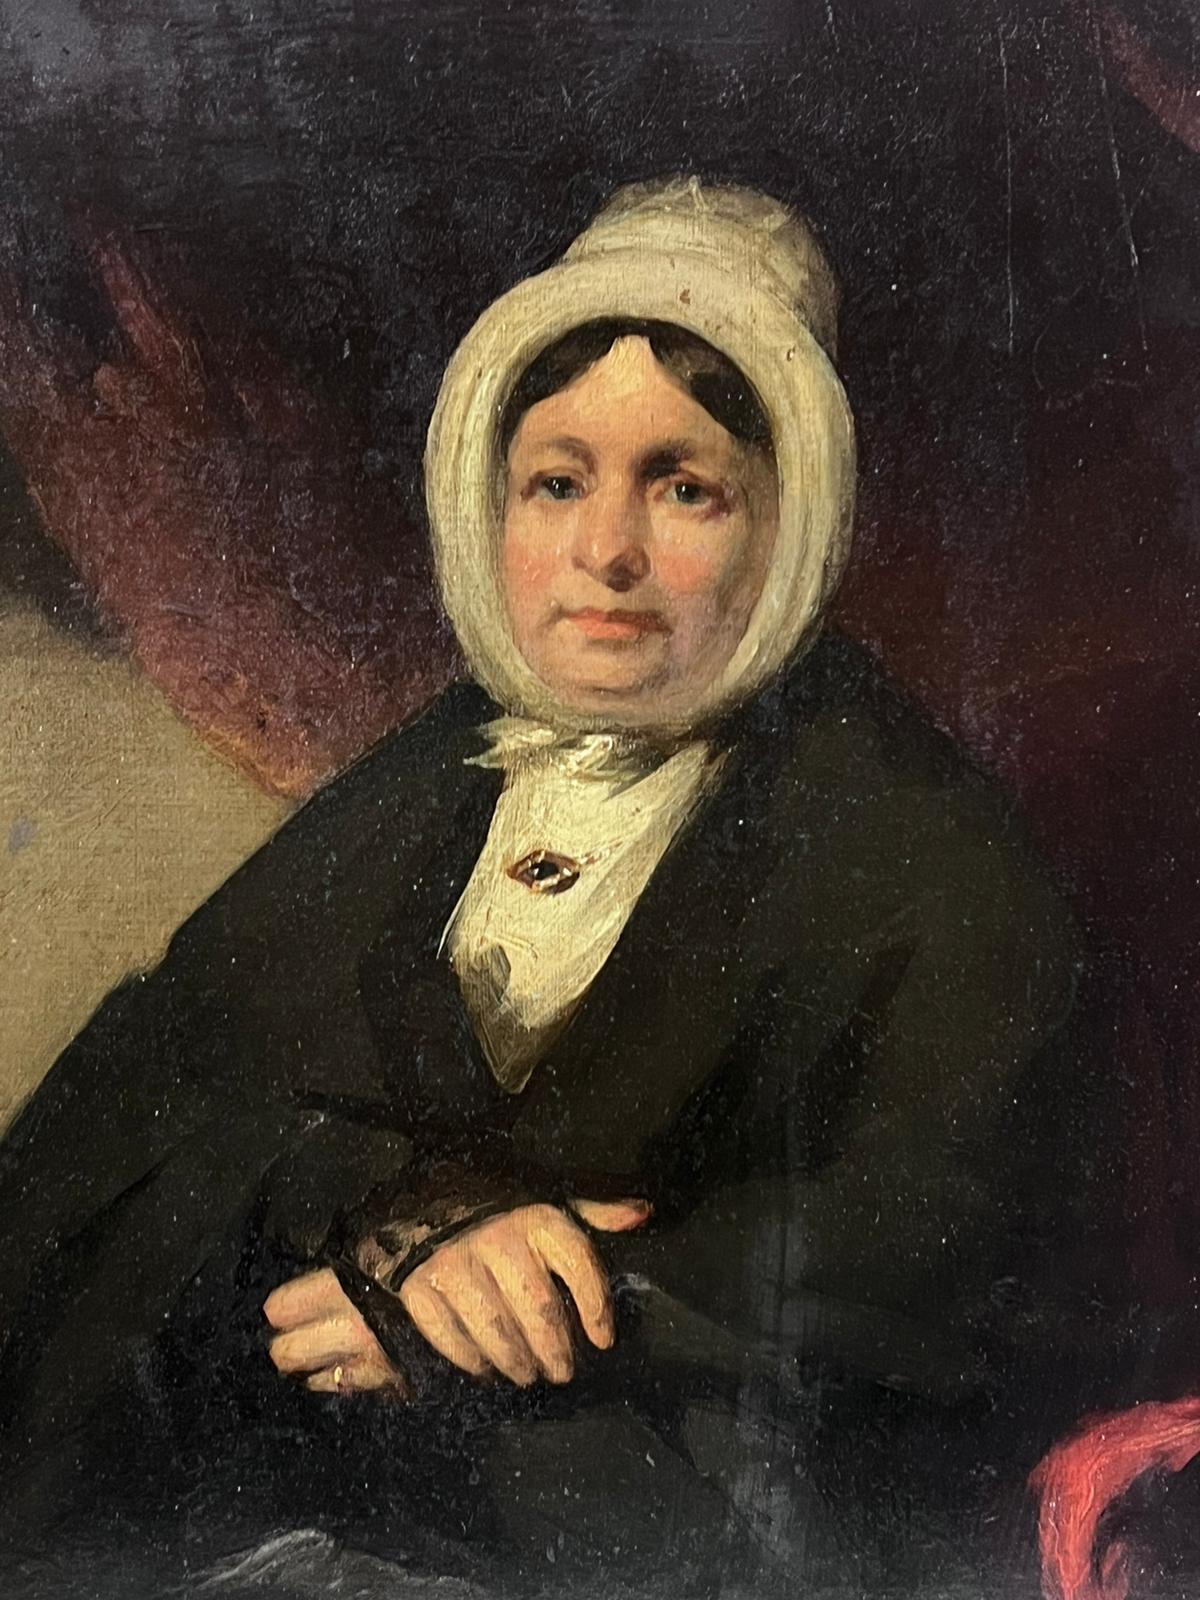 Portrait of a Seated Lady
English School, mid 19th century
oil on canvas, unframed
canvas: 16 x 13 inches
provenance: private collection, England
condition: good and sound condition 